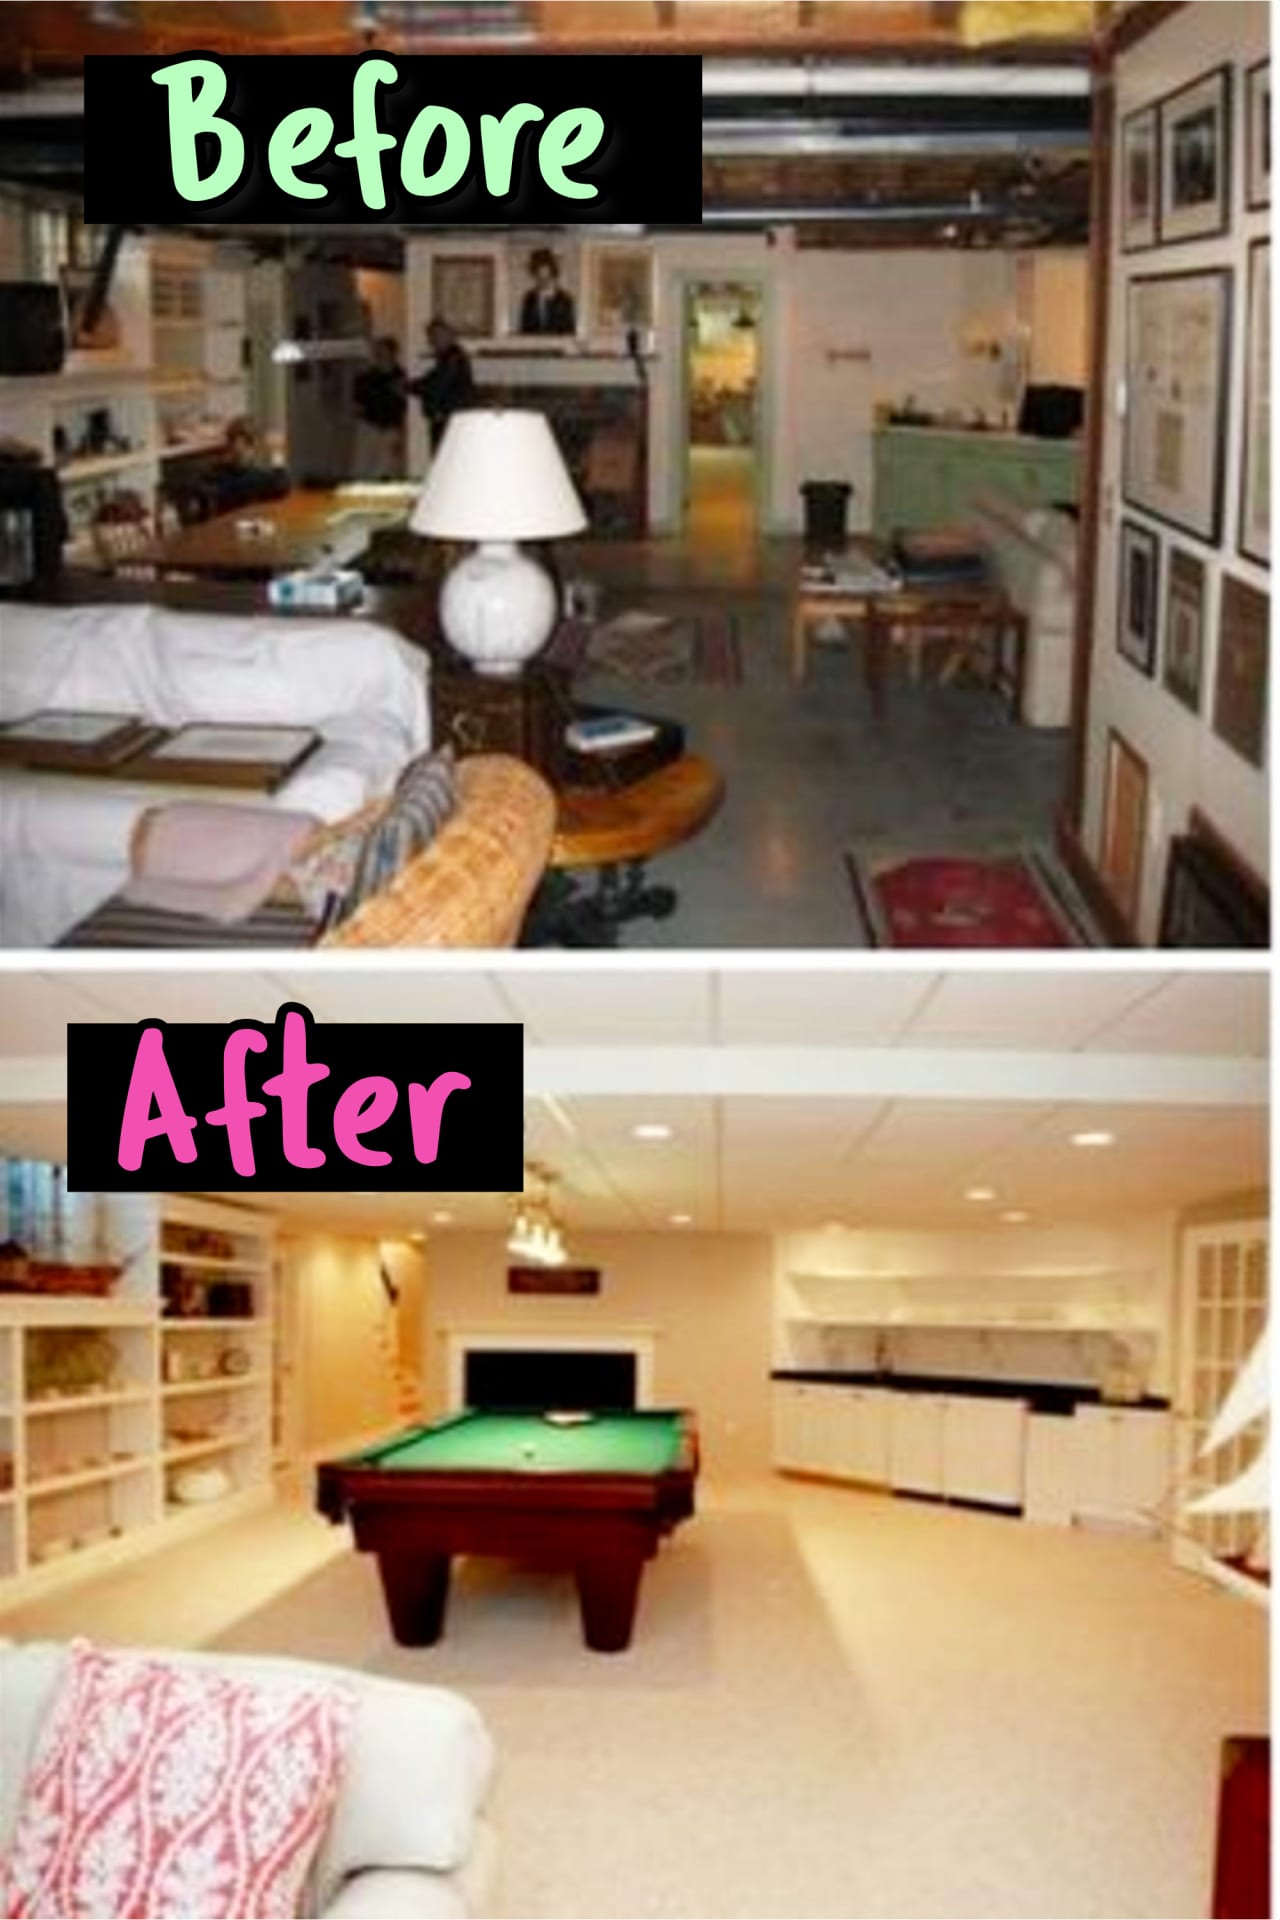 Small finished basement before after remodel ideas - Basement Ideas!  Gorgeous DIY finished basement ideas on a budget - partially finished basement ideas and small basement decor ideas for finishing and decorating a basement on a budget